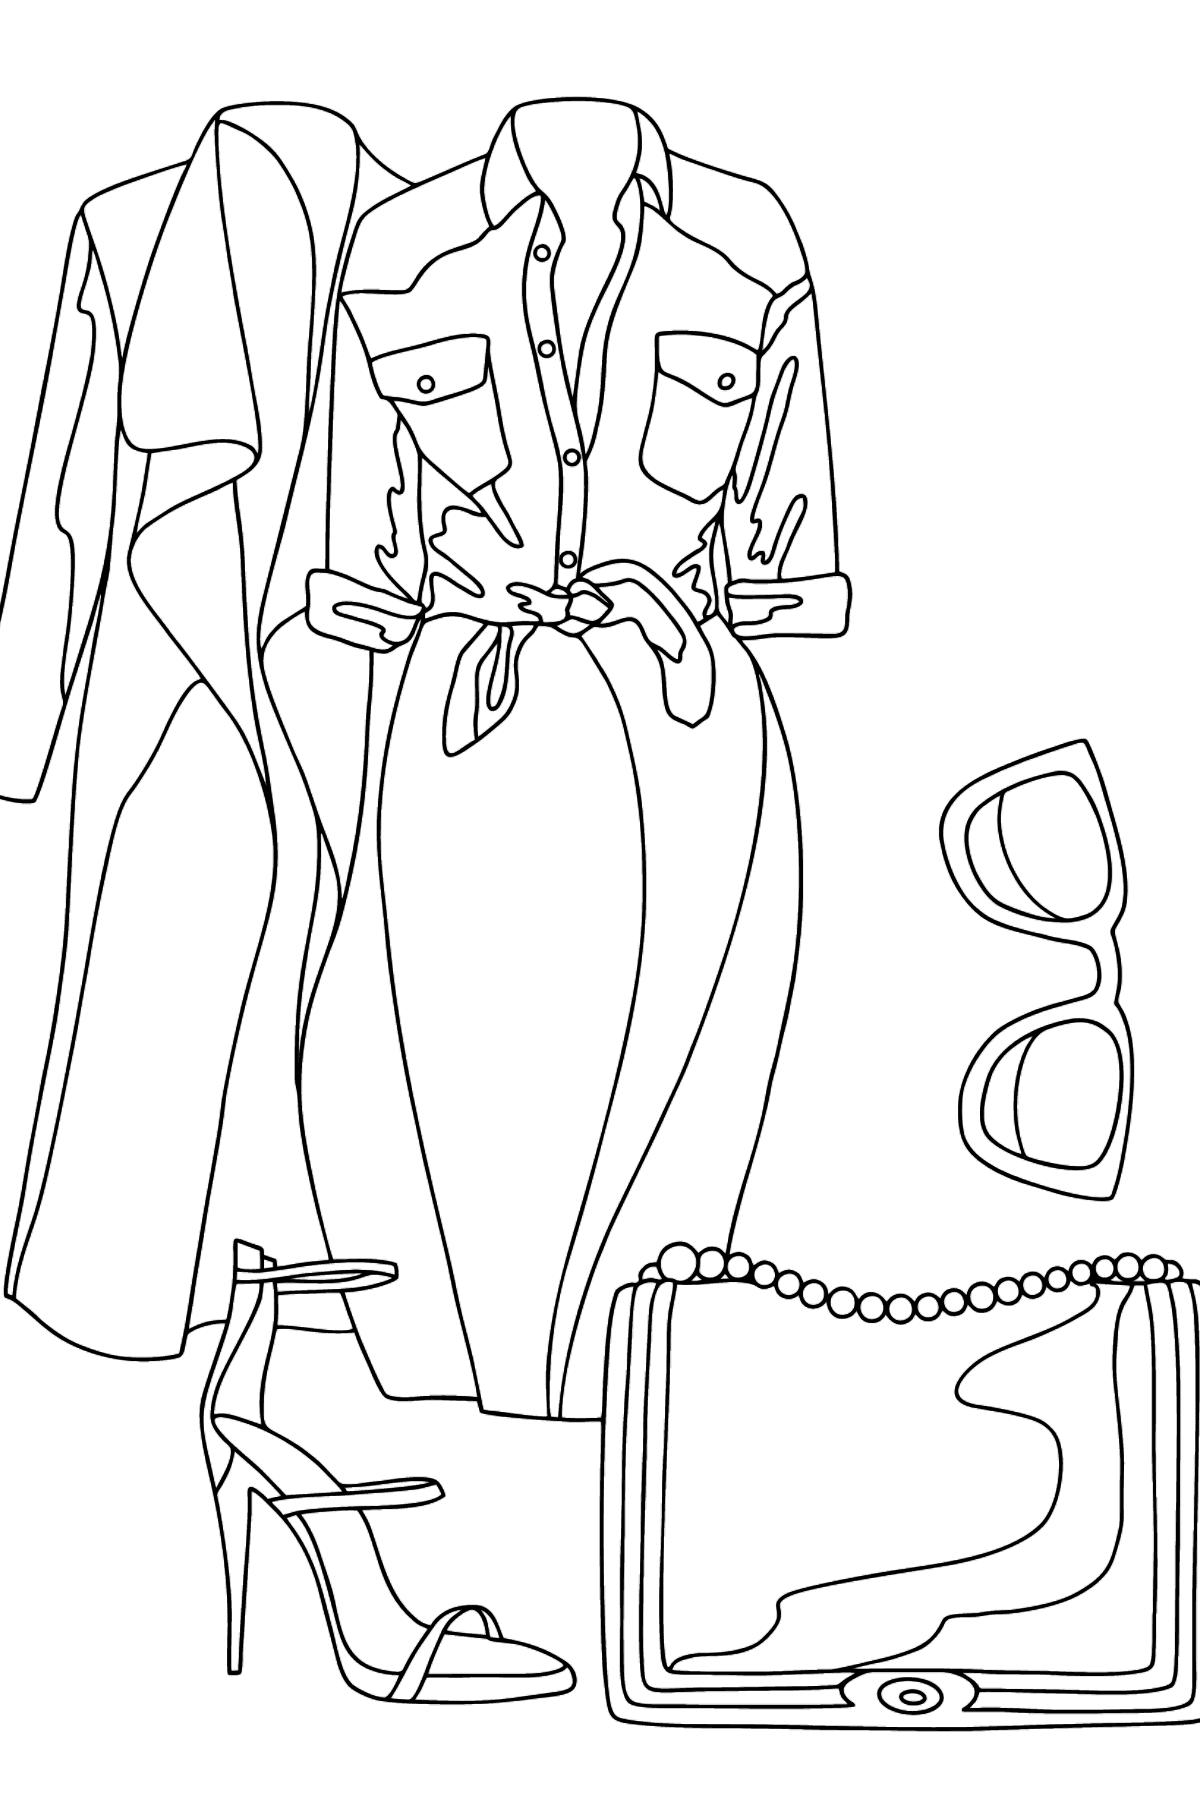 Women's suit - Fashion & Style coloring pages for Adults online